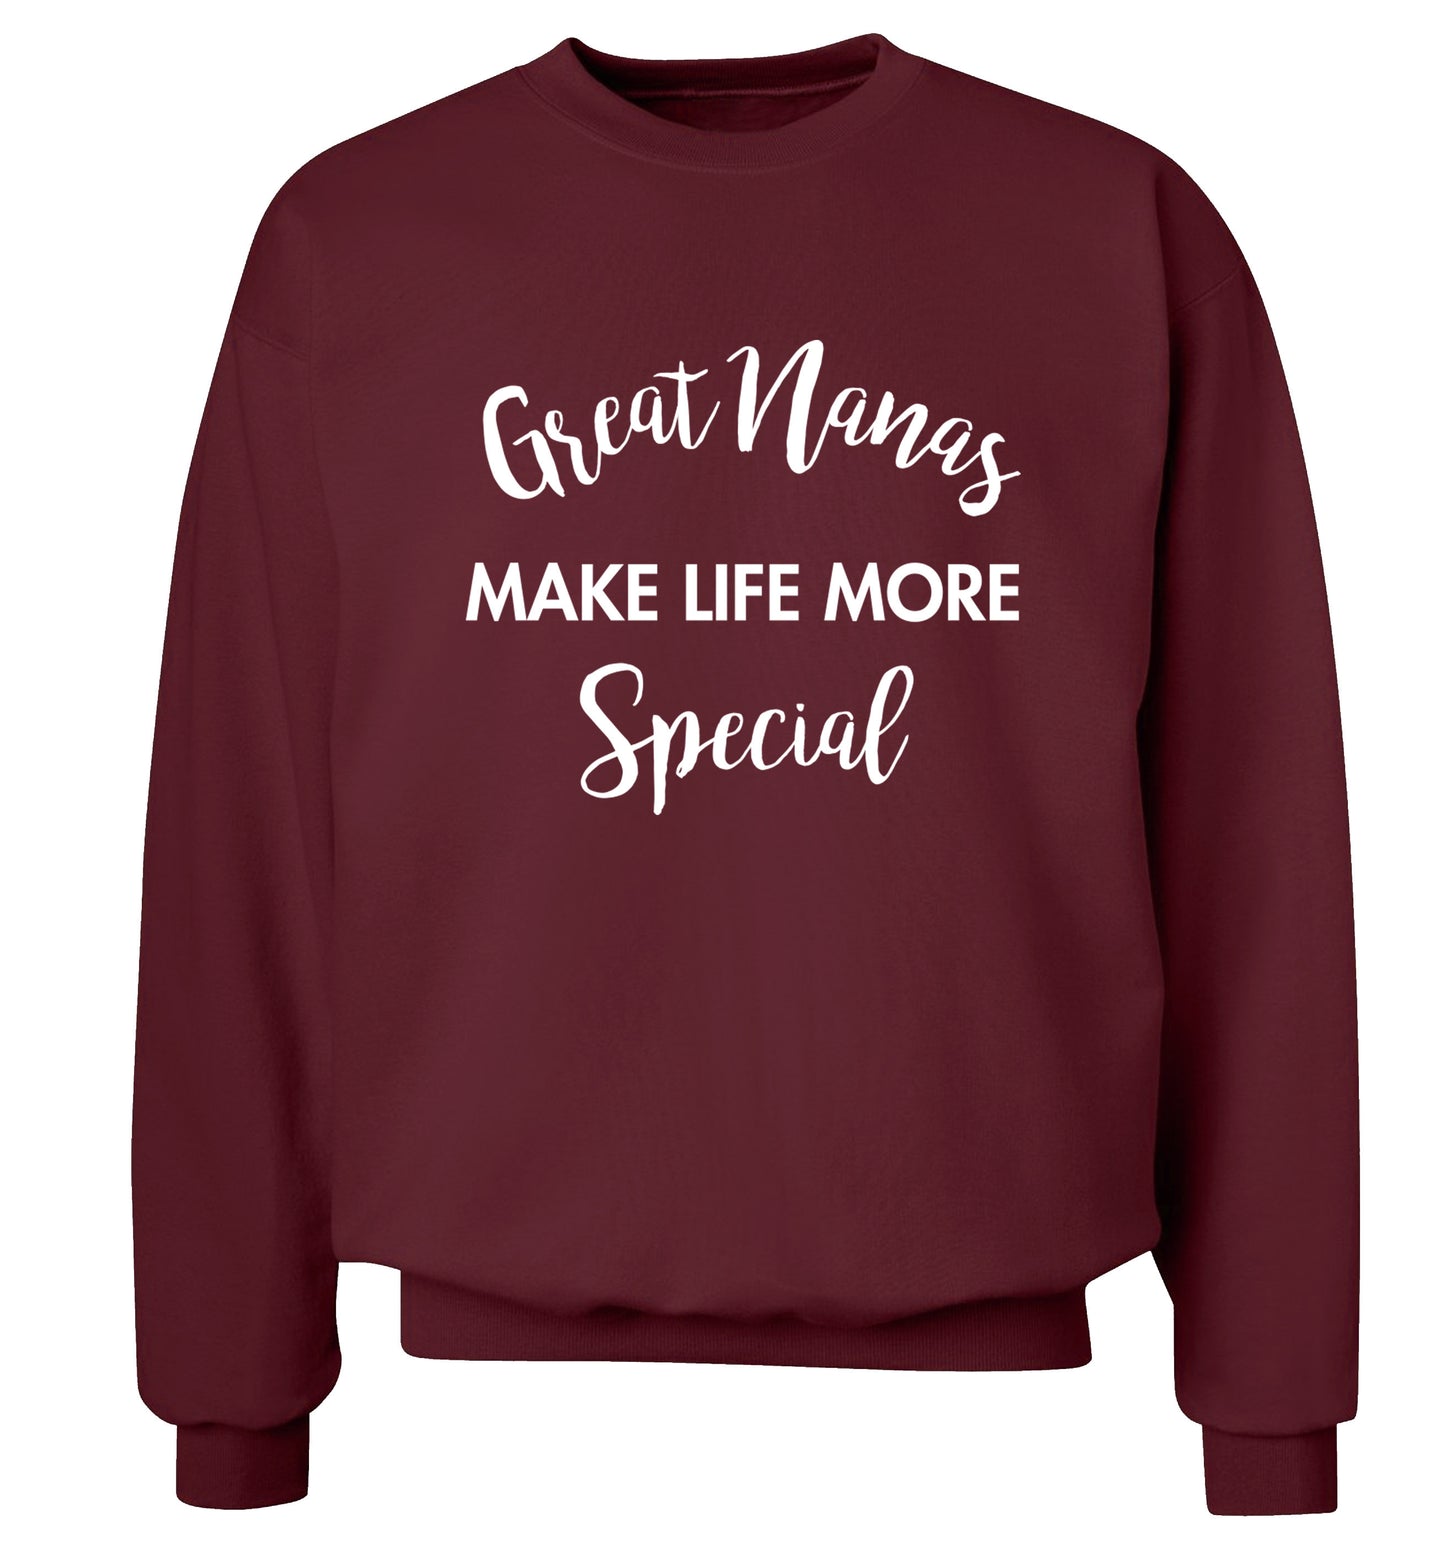 Great nanas make life more special Adult's unisex maroon Sweater 2XL